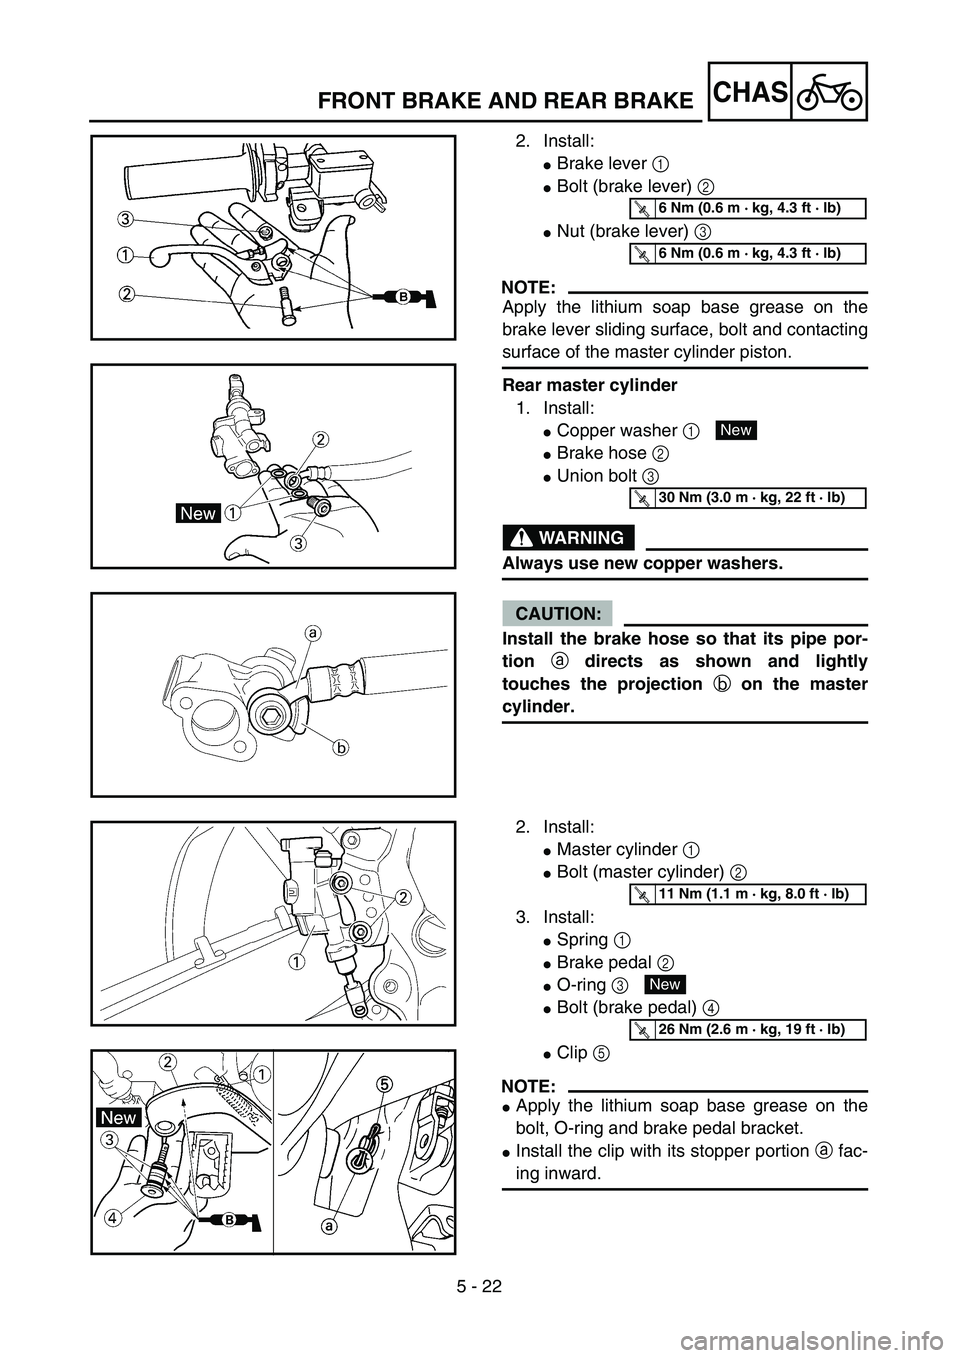 YAMAHA WR 450F 2004  Manuale de Empleo (in Spanish) 5 - 22
CHASFRONT BRAKE AND REAR BRAKE
2. Install:
Brake lever 1 
Bolt (brake lever) 2 
Nut (brake lever) 3 
NOTE:
Apply the lithium soap base grease on the
brake lever sliding surface, bolt and con